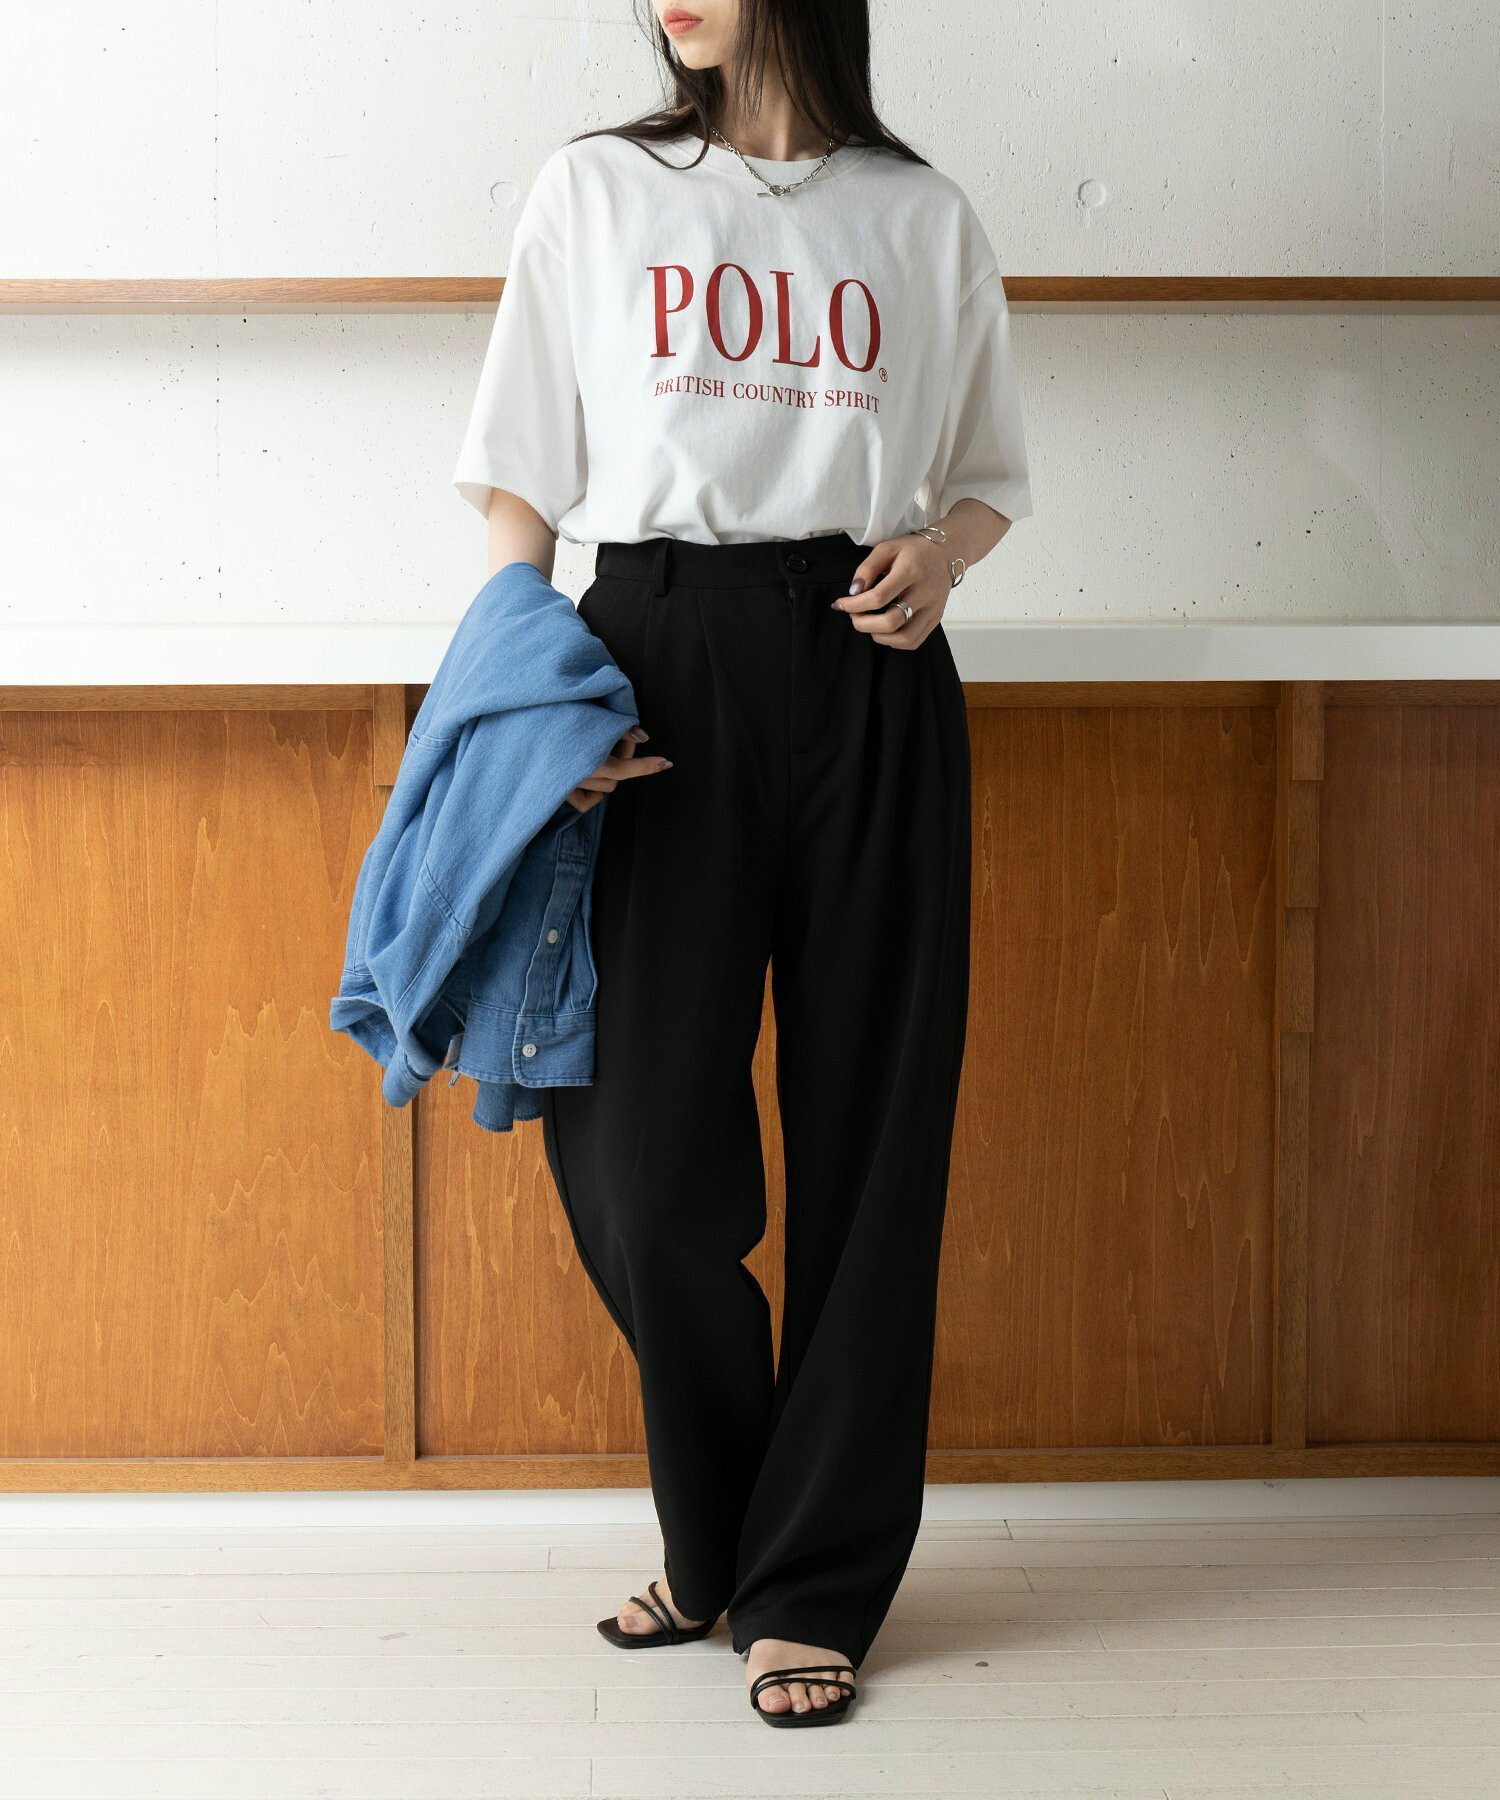 POLO BCS/oversize print Tee　24SS　母の日　ギフト　ユニセックス　